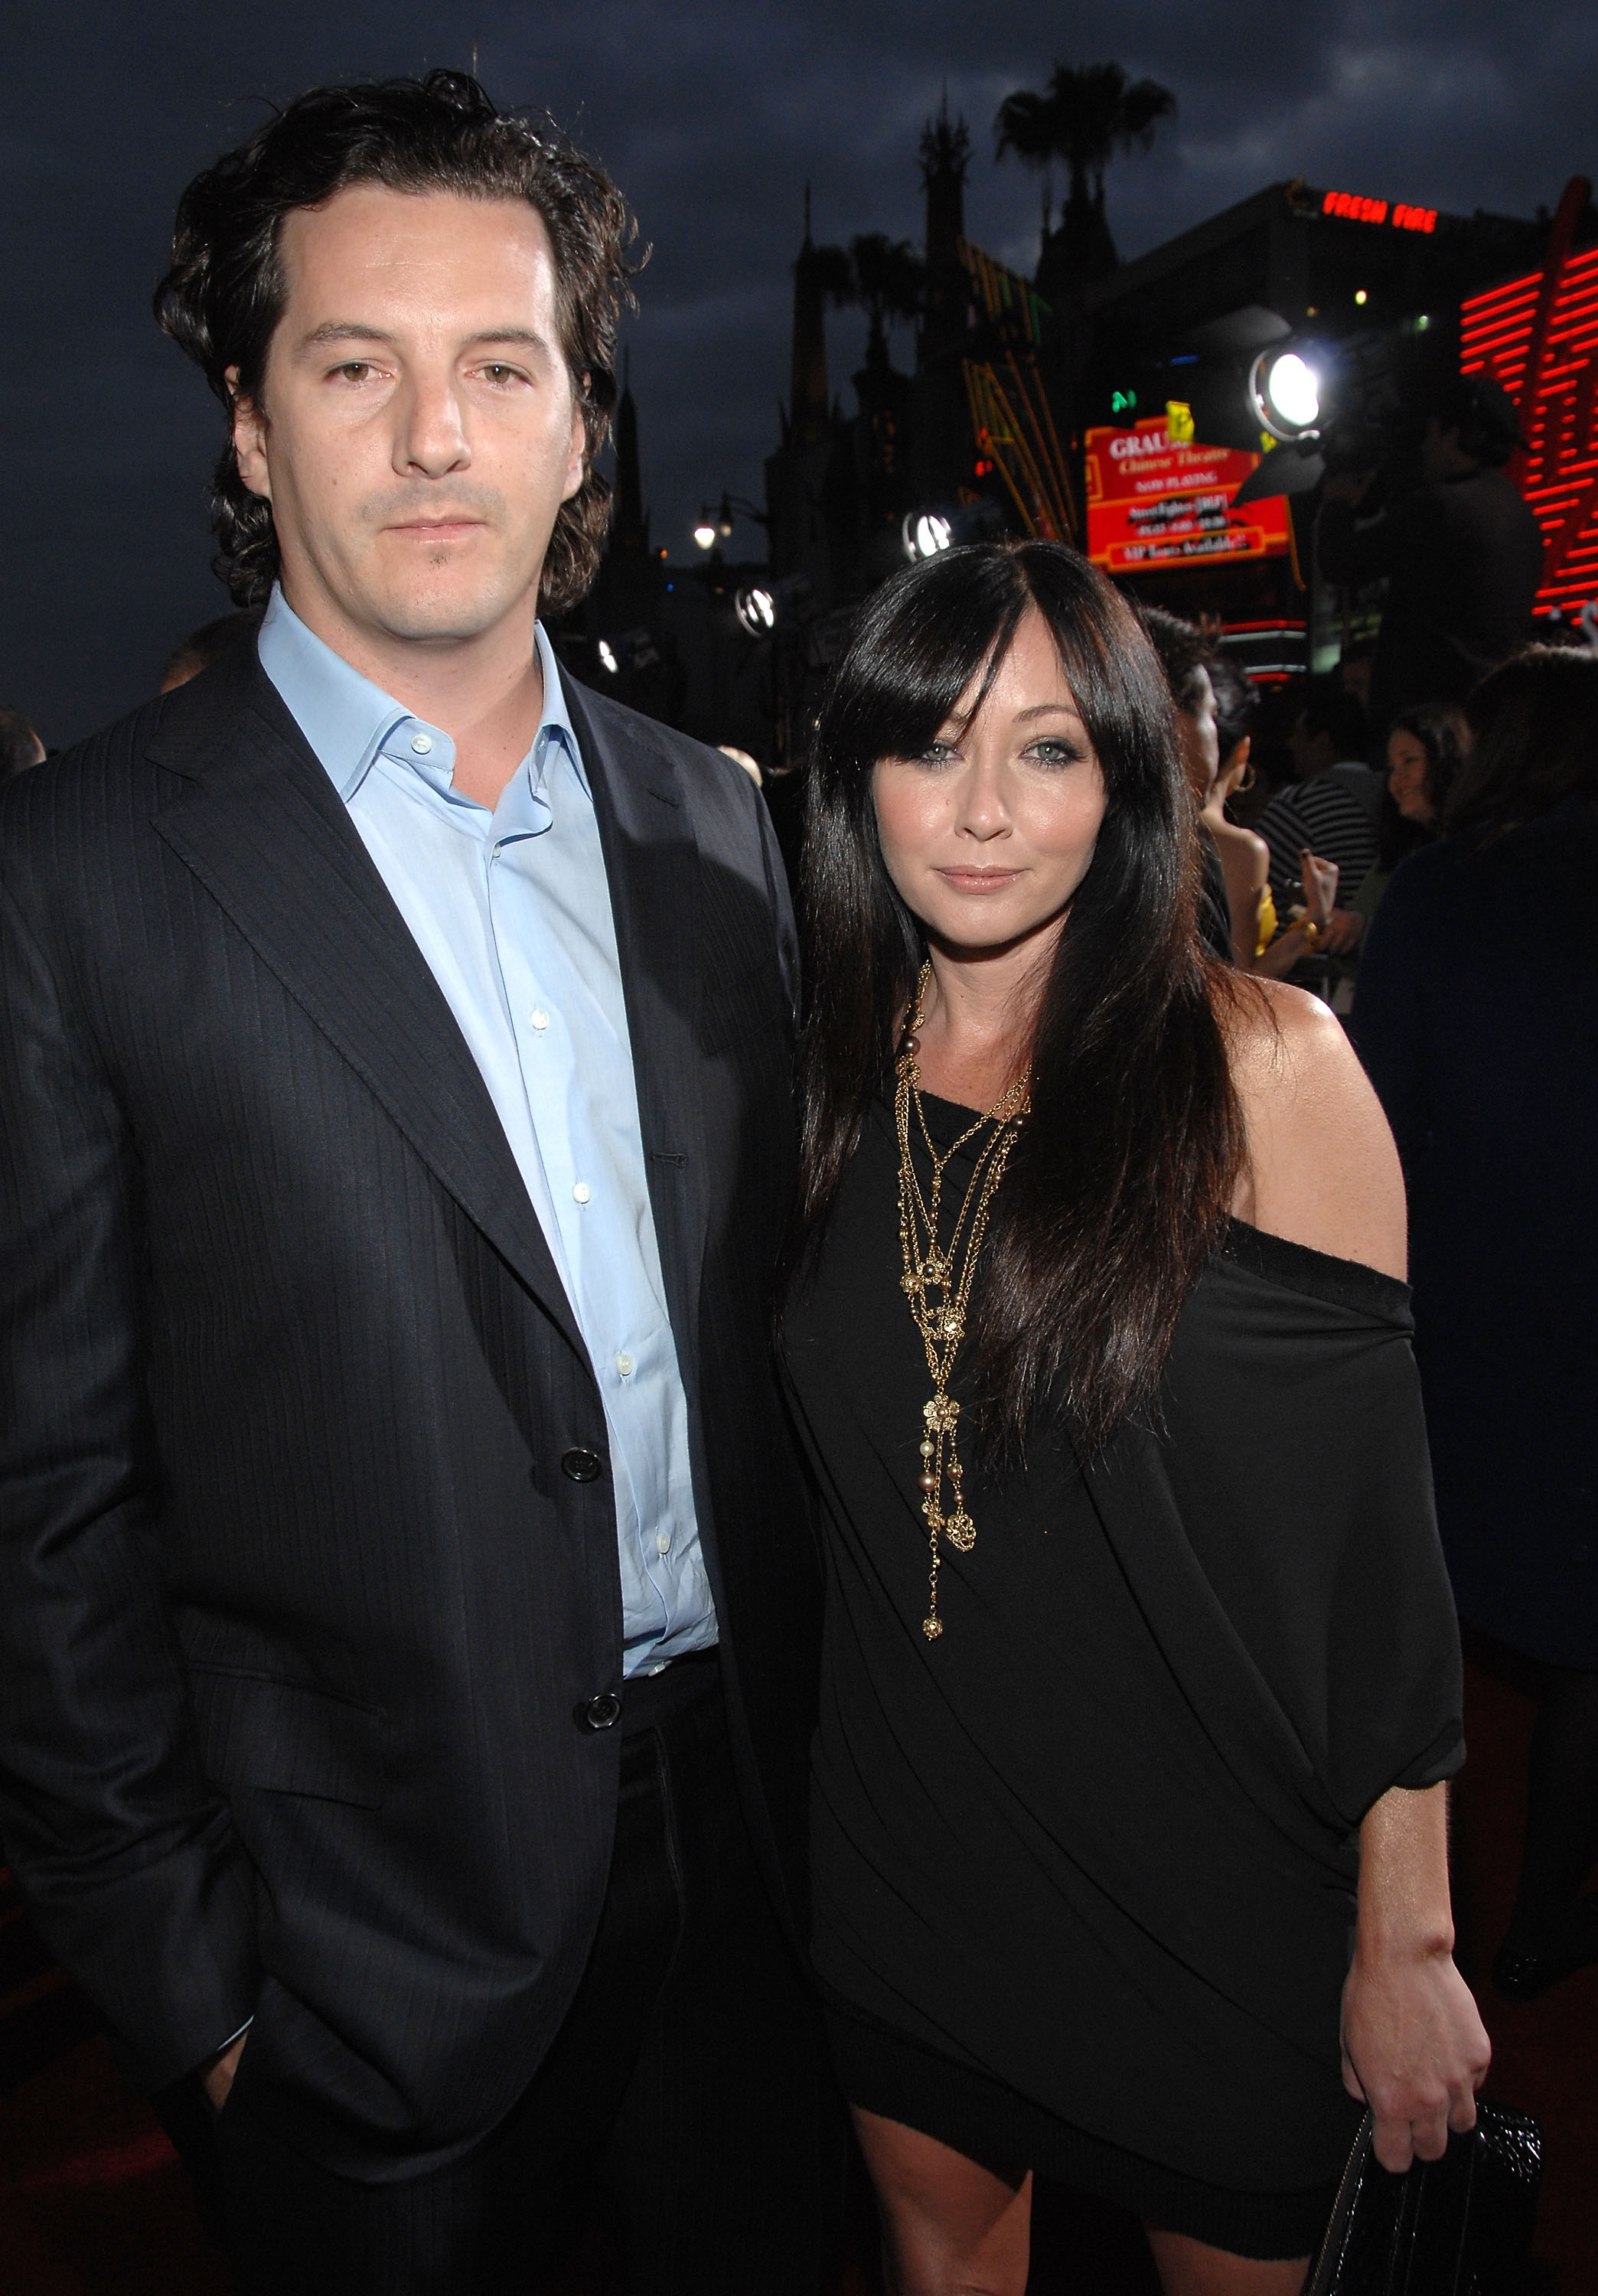 Kurt Iswarienko and Shannen Doherty at the premiere of "Race To Witch Mountain" on March 11, 2009, in Hollywood, California. | Source: Getty Images